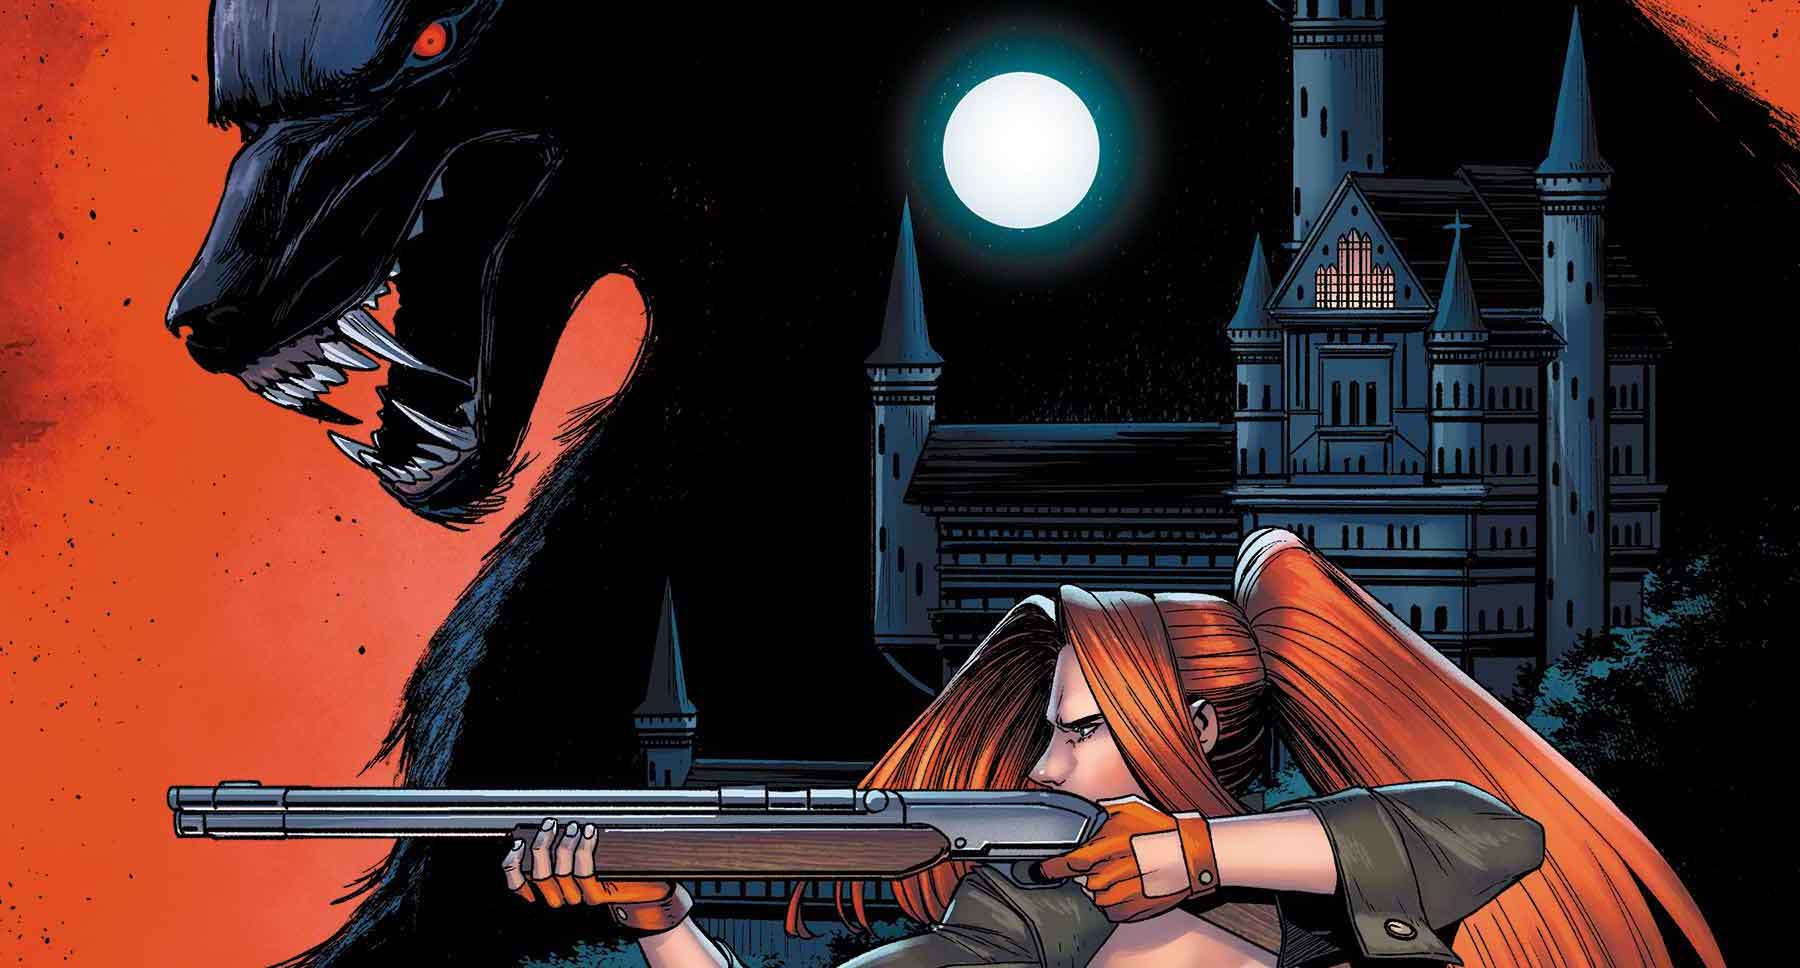 'Werewolf By Night' #1 is a good monster romp